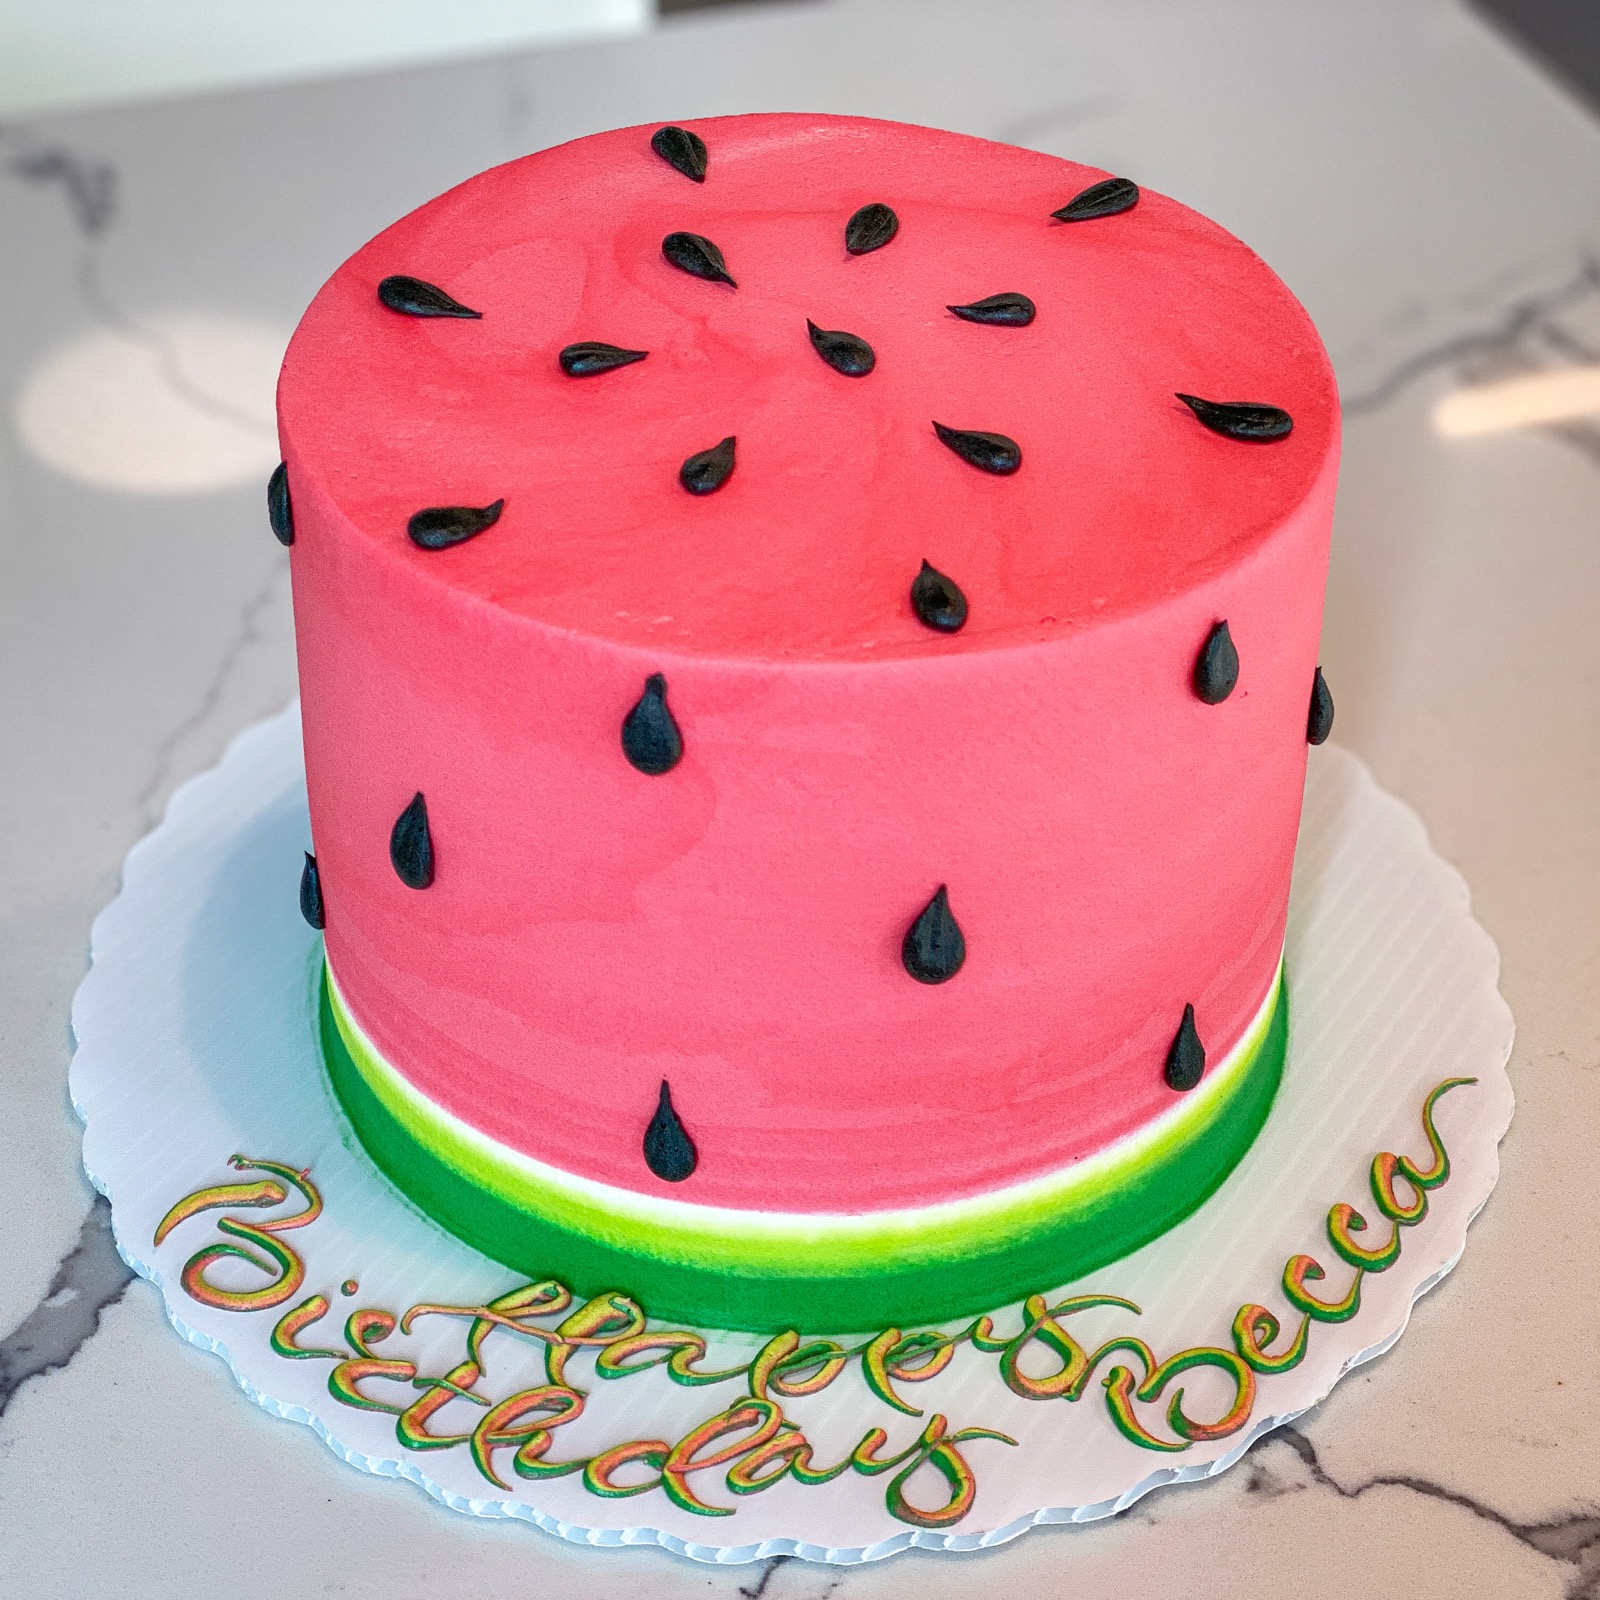 Watermelon Cake Recipe With Whipped Cream - Baking Beauty